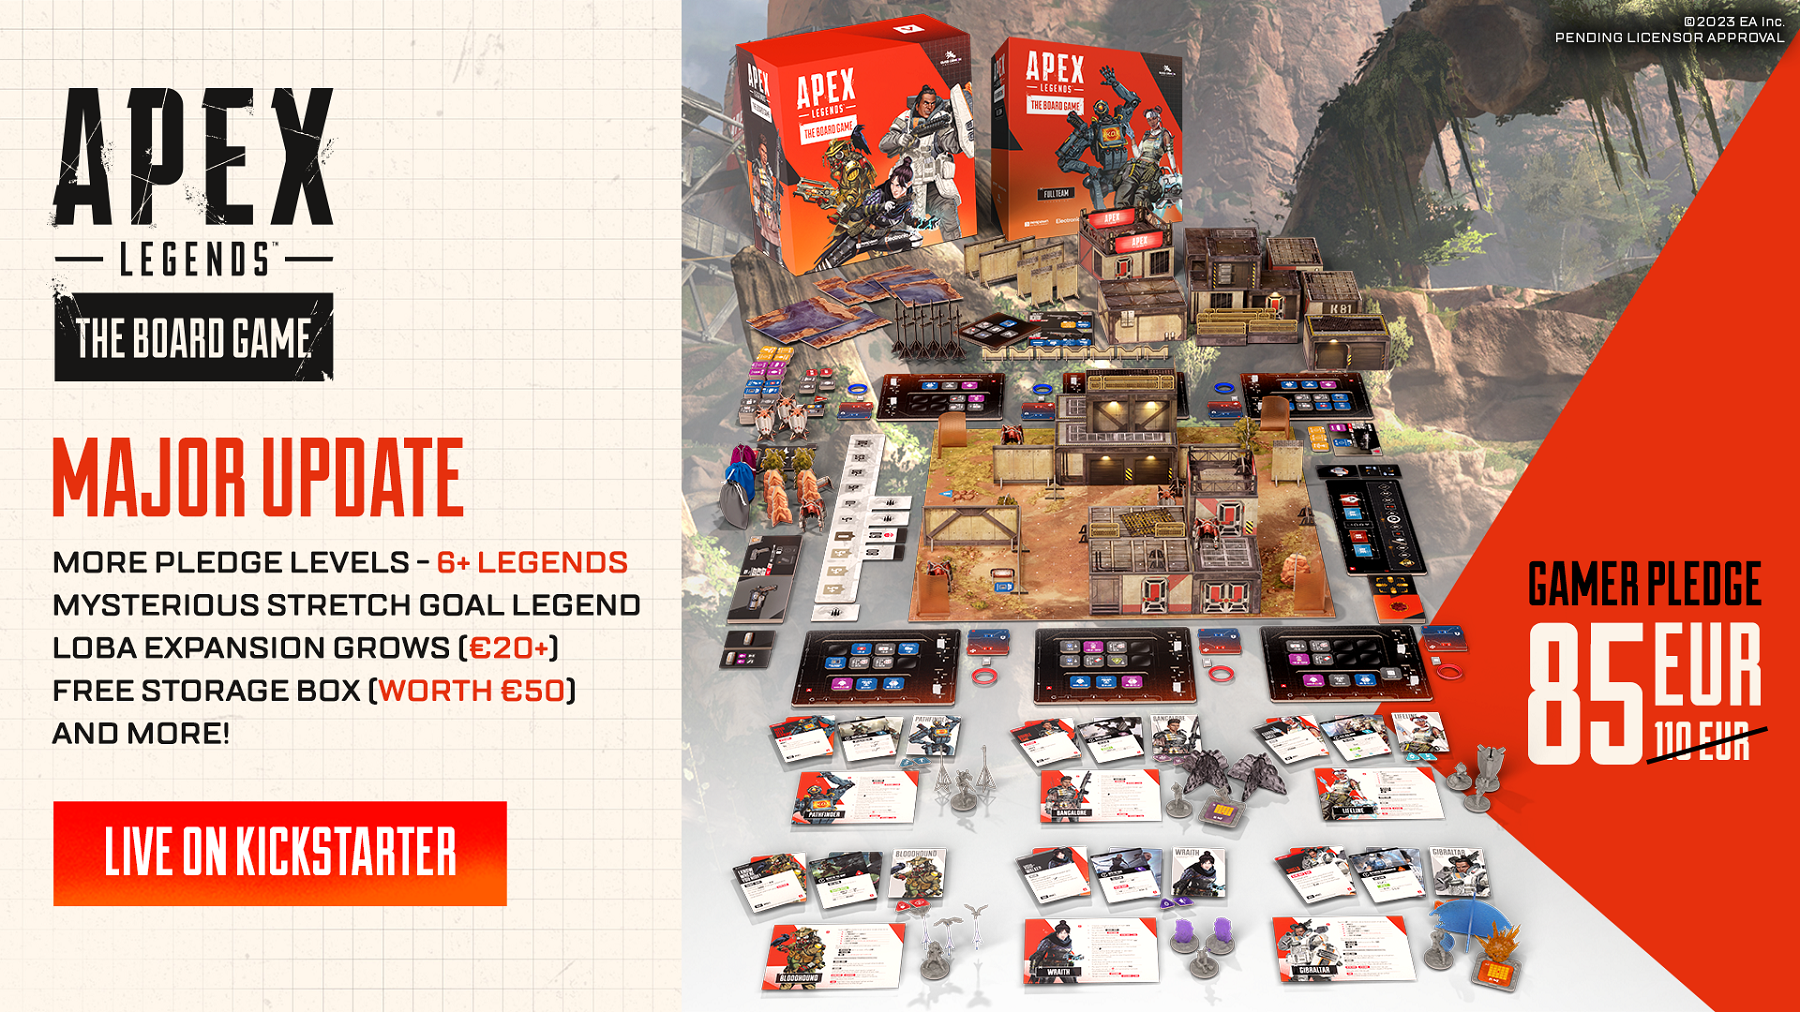 Official Apex Legends Board Game Successfully Funded, Adds Exclusive Items and New Pledge Options in Huge Campaign Update